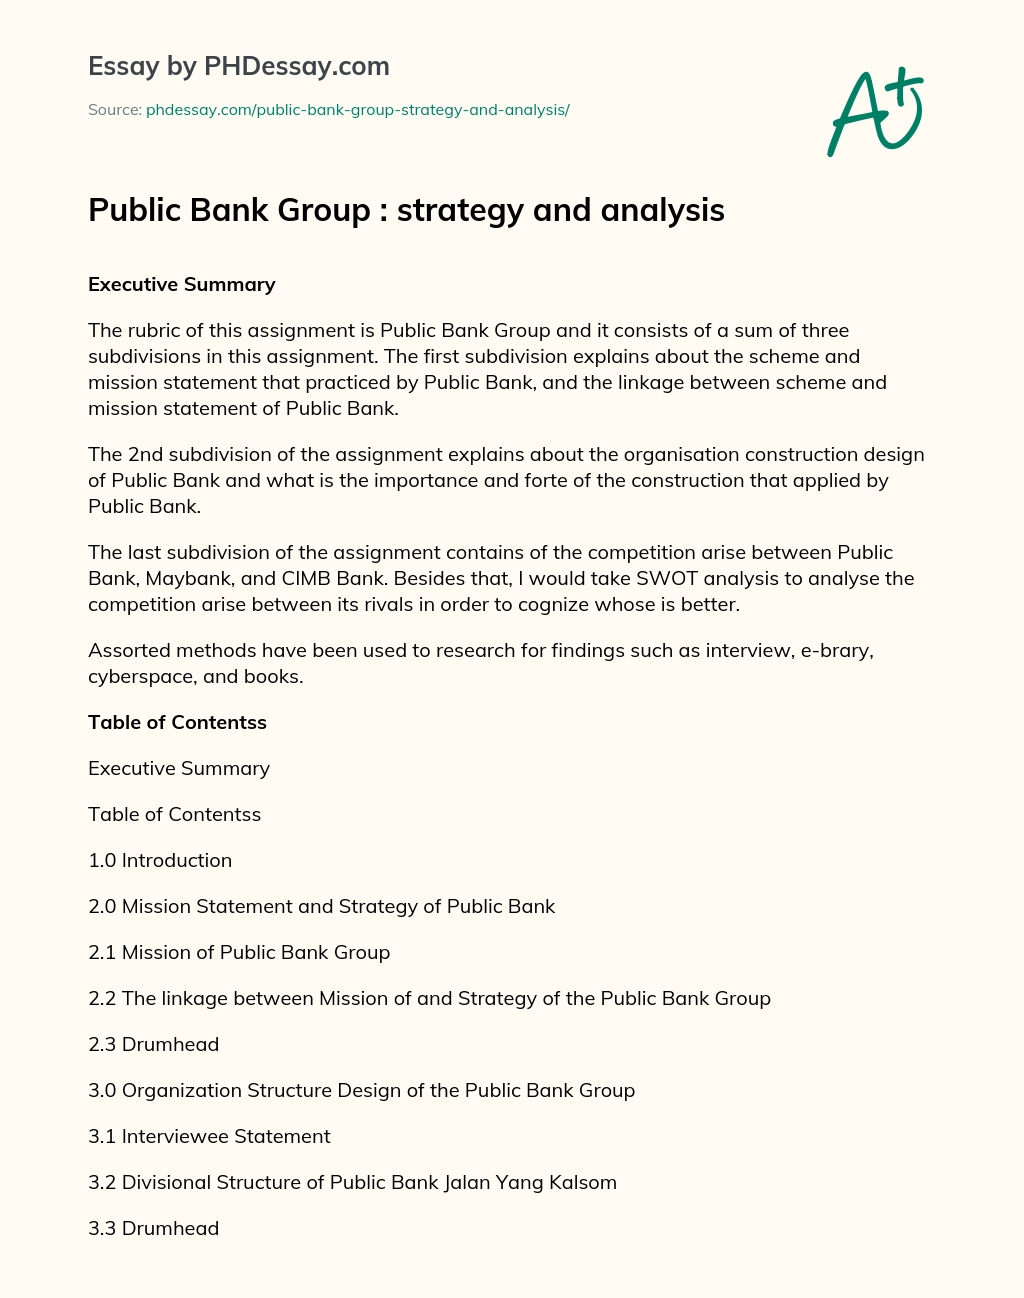 Public Bank Group : strategy and analysis essay